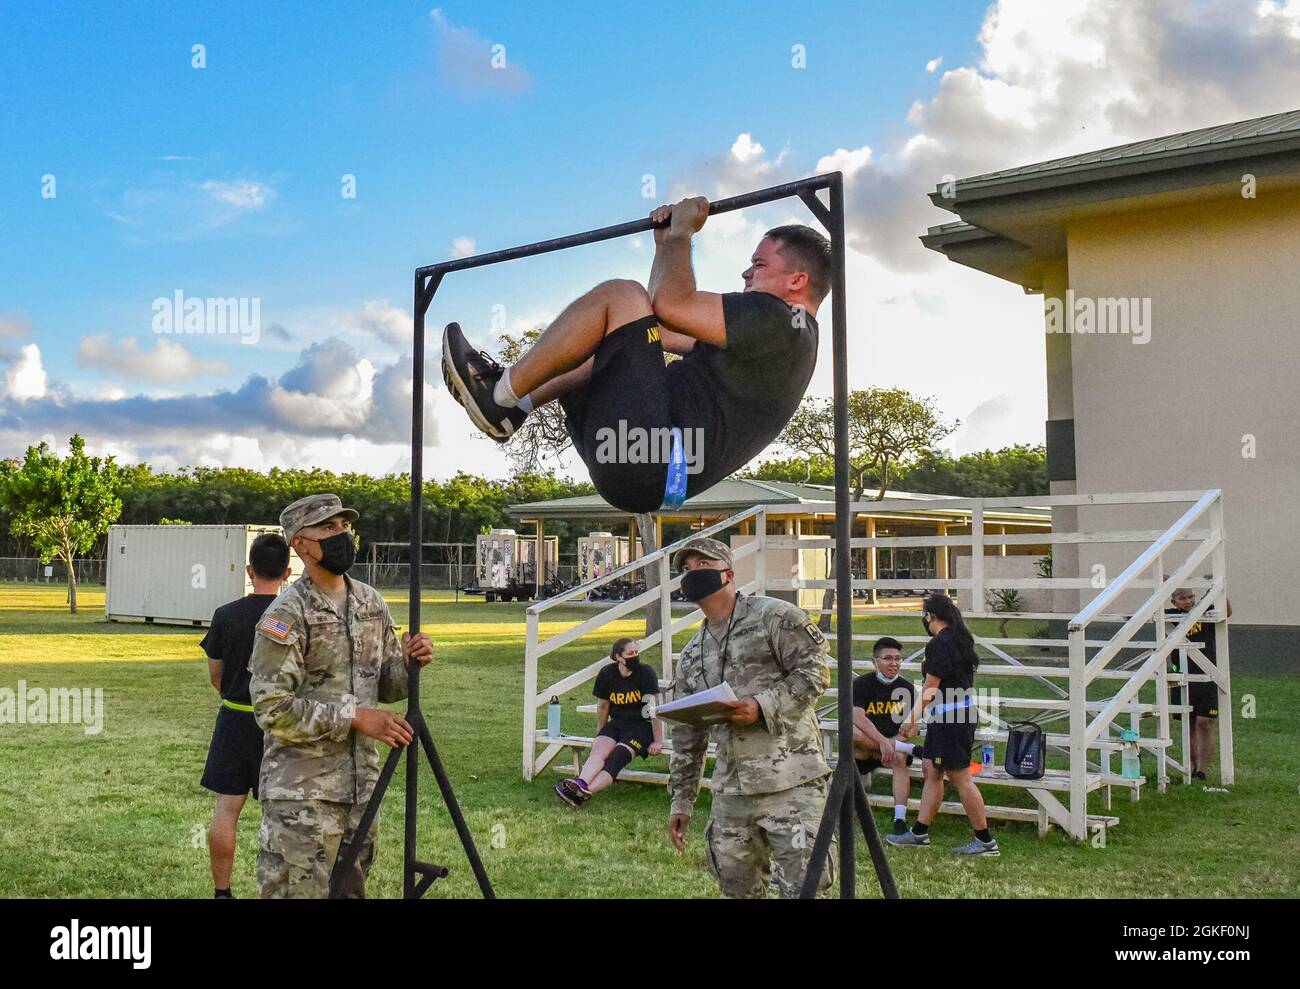 Hawaii Army National Guard Soldier, Capt. Adam Herrmann, a Logistics Officer with Headquarters and Headquarters Company, 103rd Troop Command performs the leg tuck (LTK) event during the Army Combat Fitness Test, Waimanalo, Hawaii, April 2, 2021. The LTK measures upper and lower body explosive power, flexibility, and dynamic balance assisting with tasks like a buddy drag, throwing a hand grenade and employing progressive levels of force in man-to-man contact. The six-event readiness assessment, ACFT, is intended to replace the current three-event Army Physical Fitness Test, which has been aroun Stock Photo